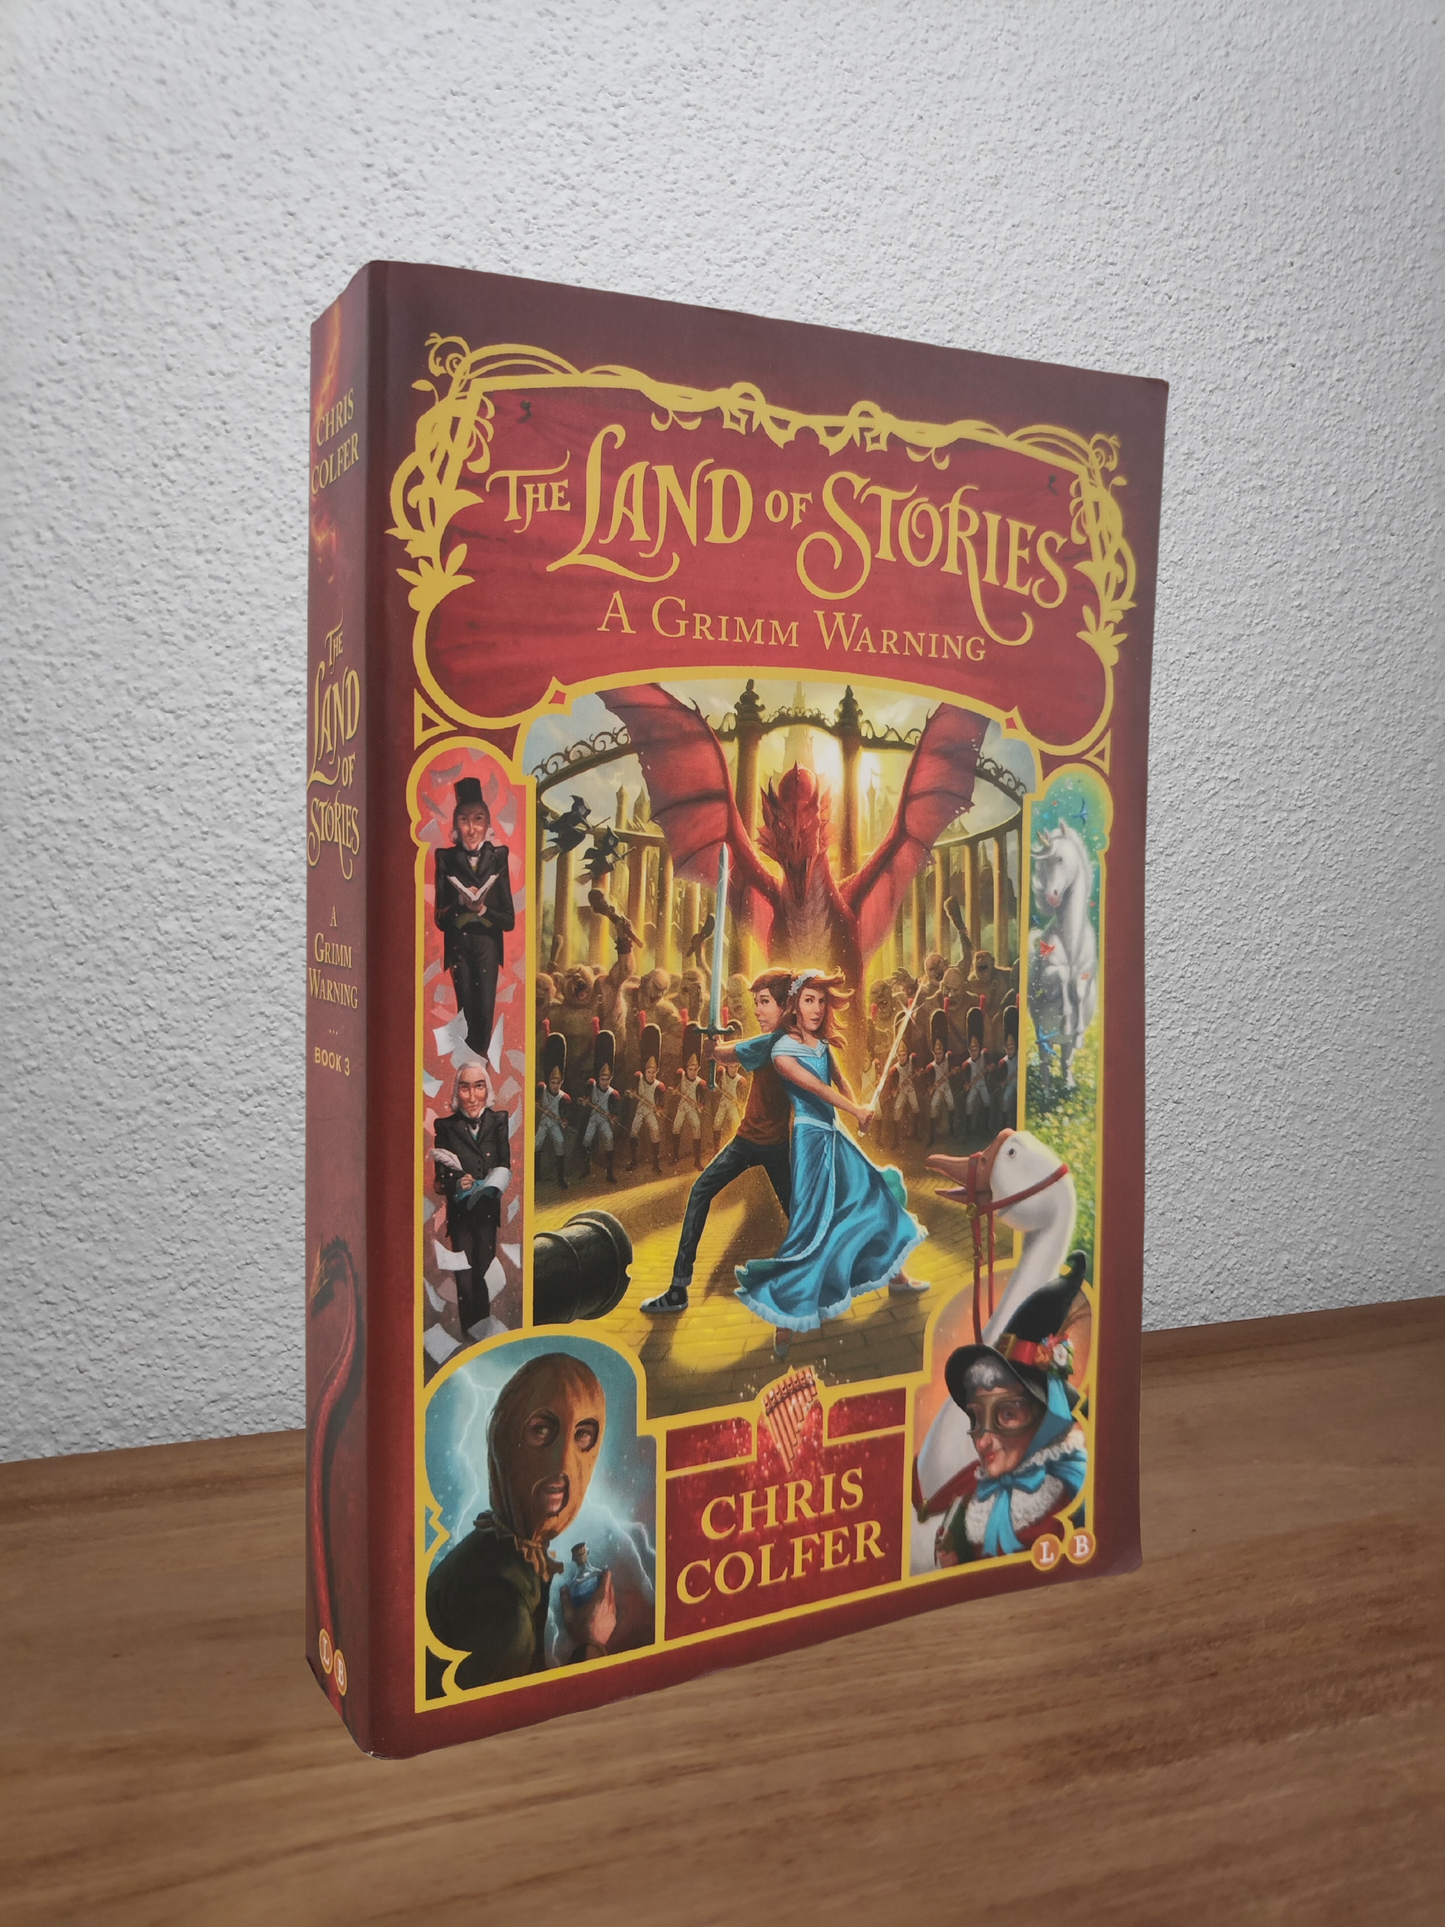 Chris Colfer - The Land of Stories: A Grimm Warning #3